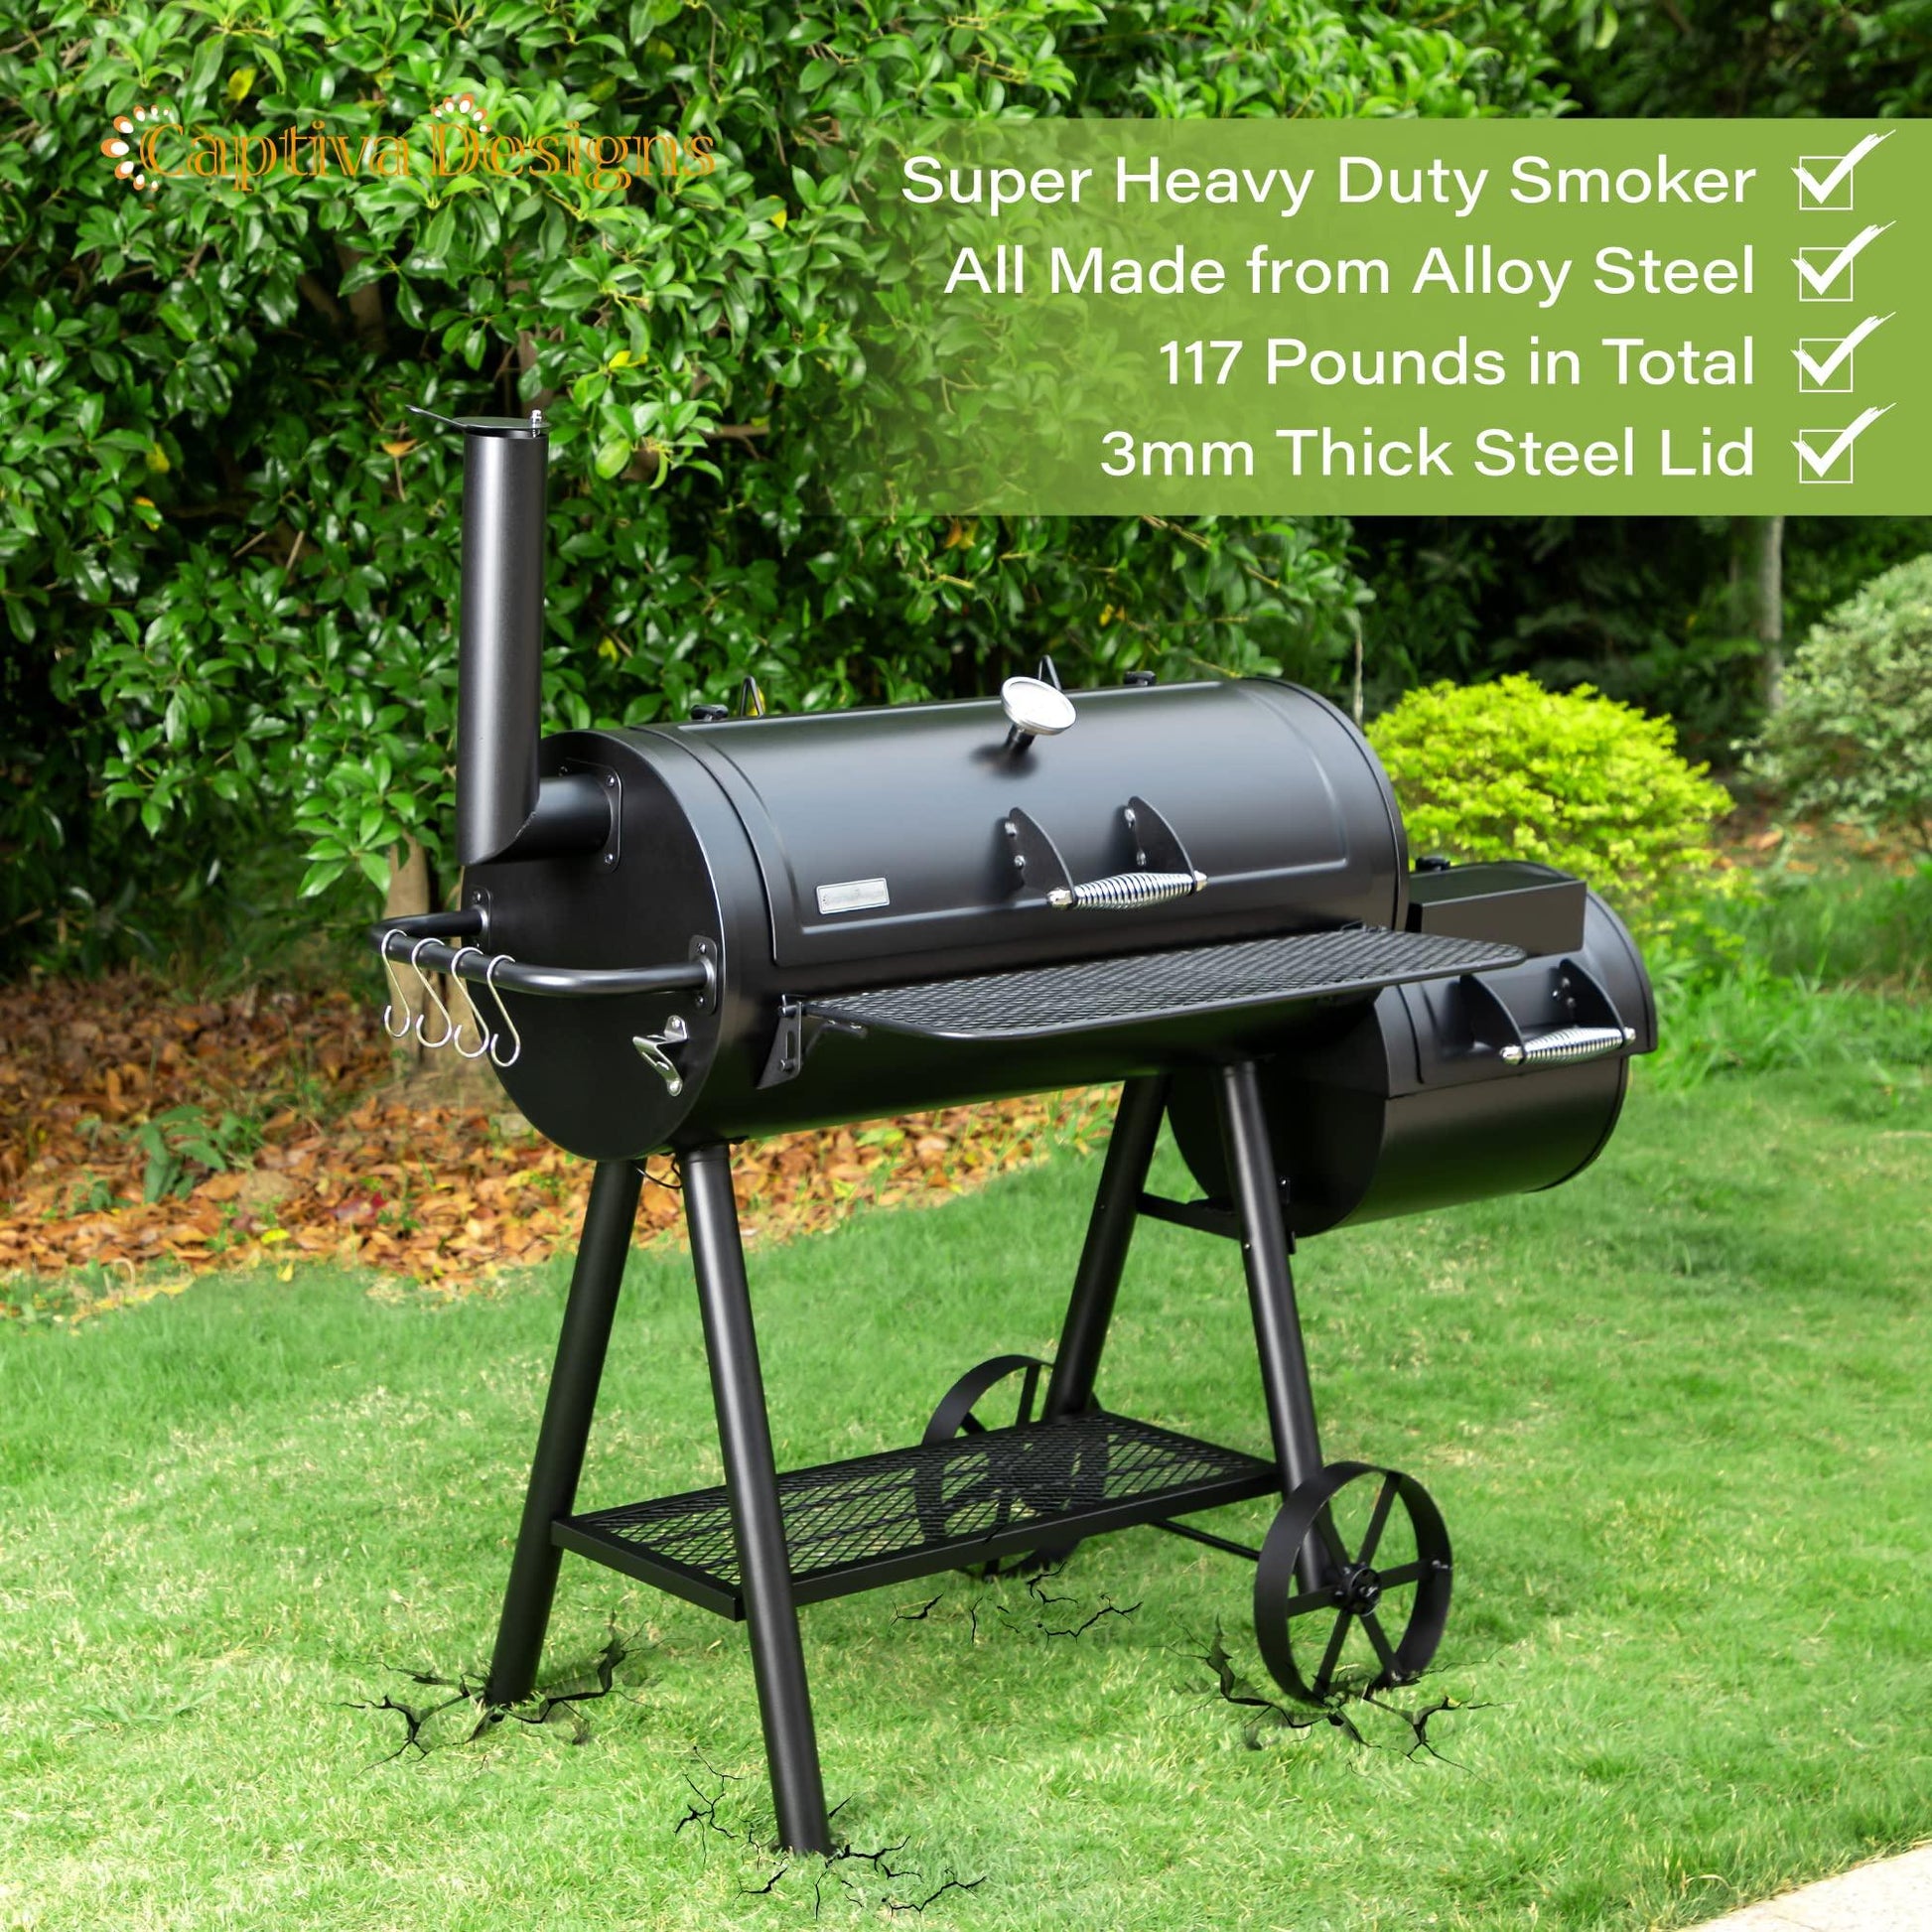 Captiva Designs Heavy Duty Outdoor Smoker,Extra Large Cooking Area(941 sq.in. in Total) Offset Smoker, Best Charcoal Smoker and Grill Combo for Outdoor Garden Patio and Backyard Cooking - CookCave